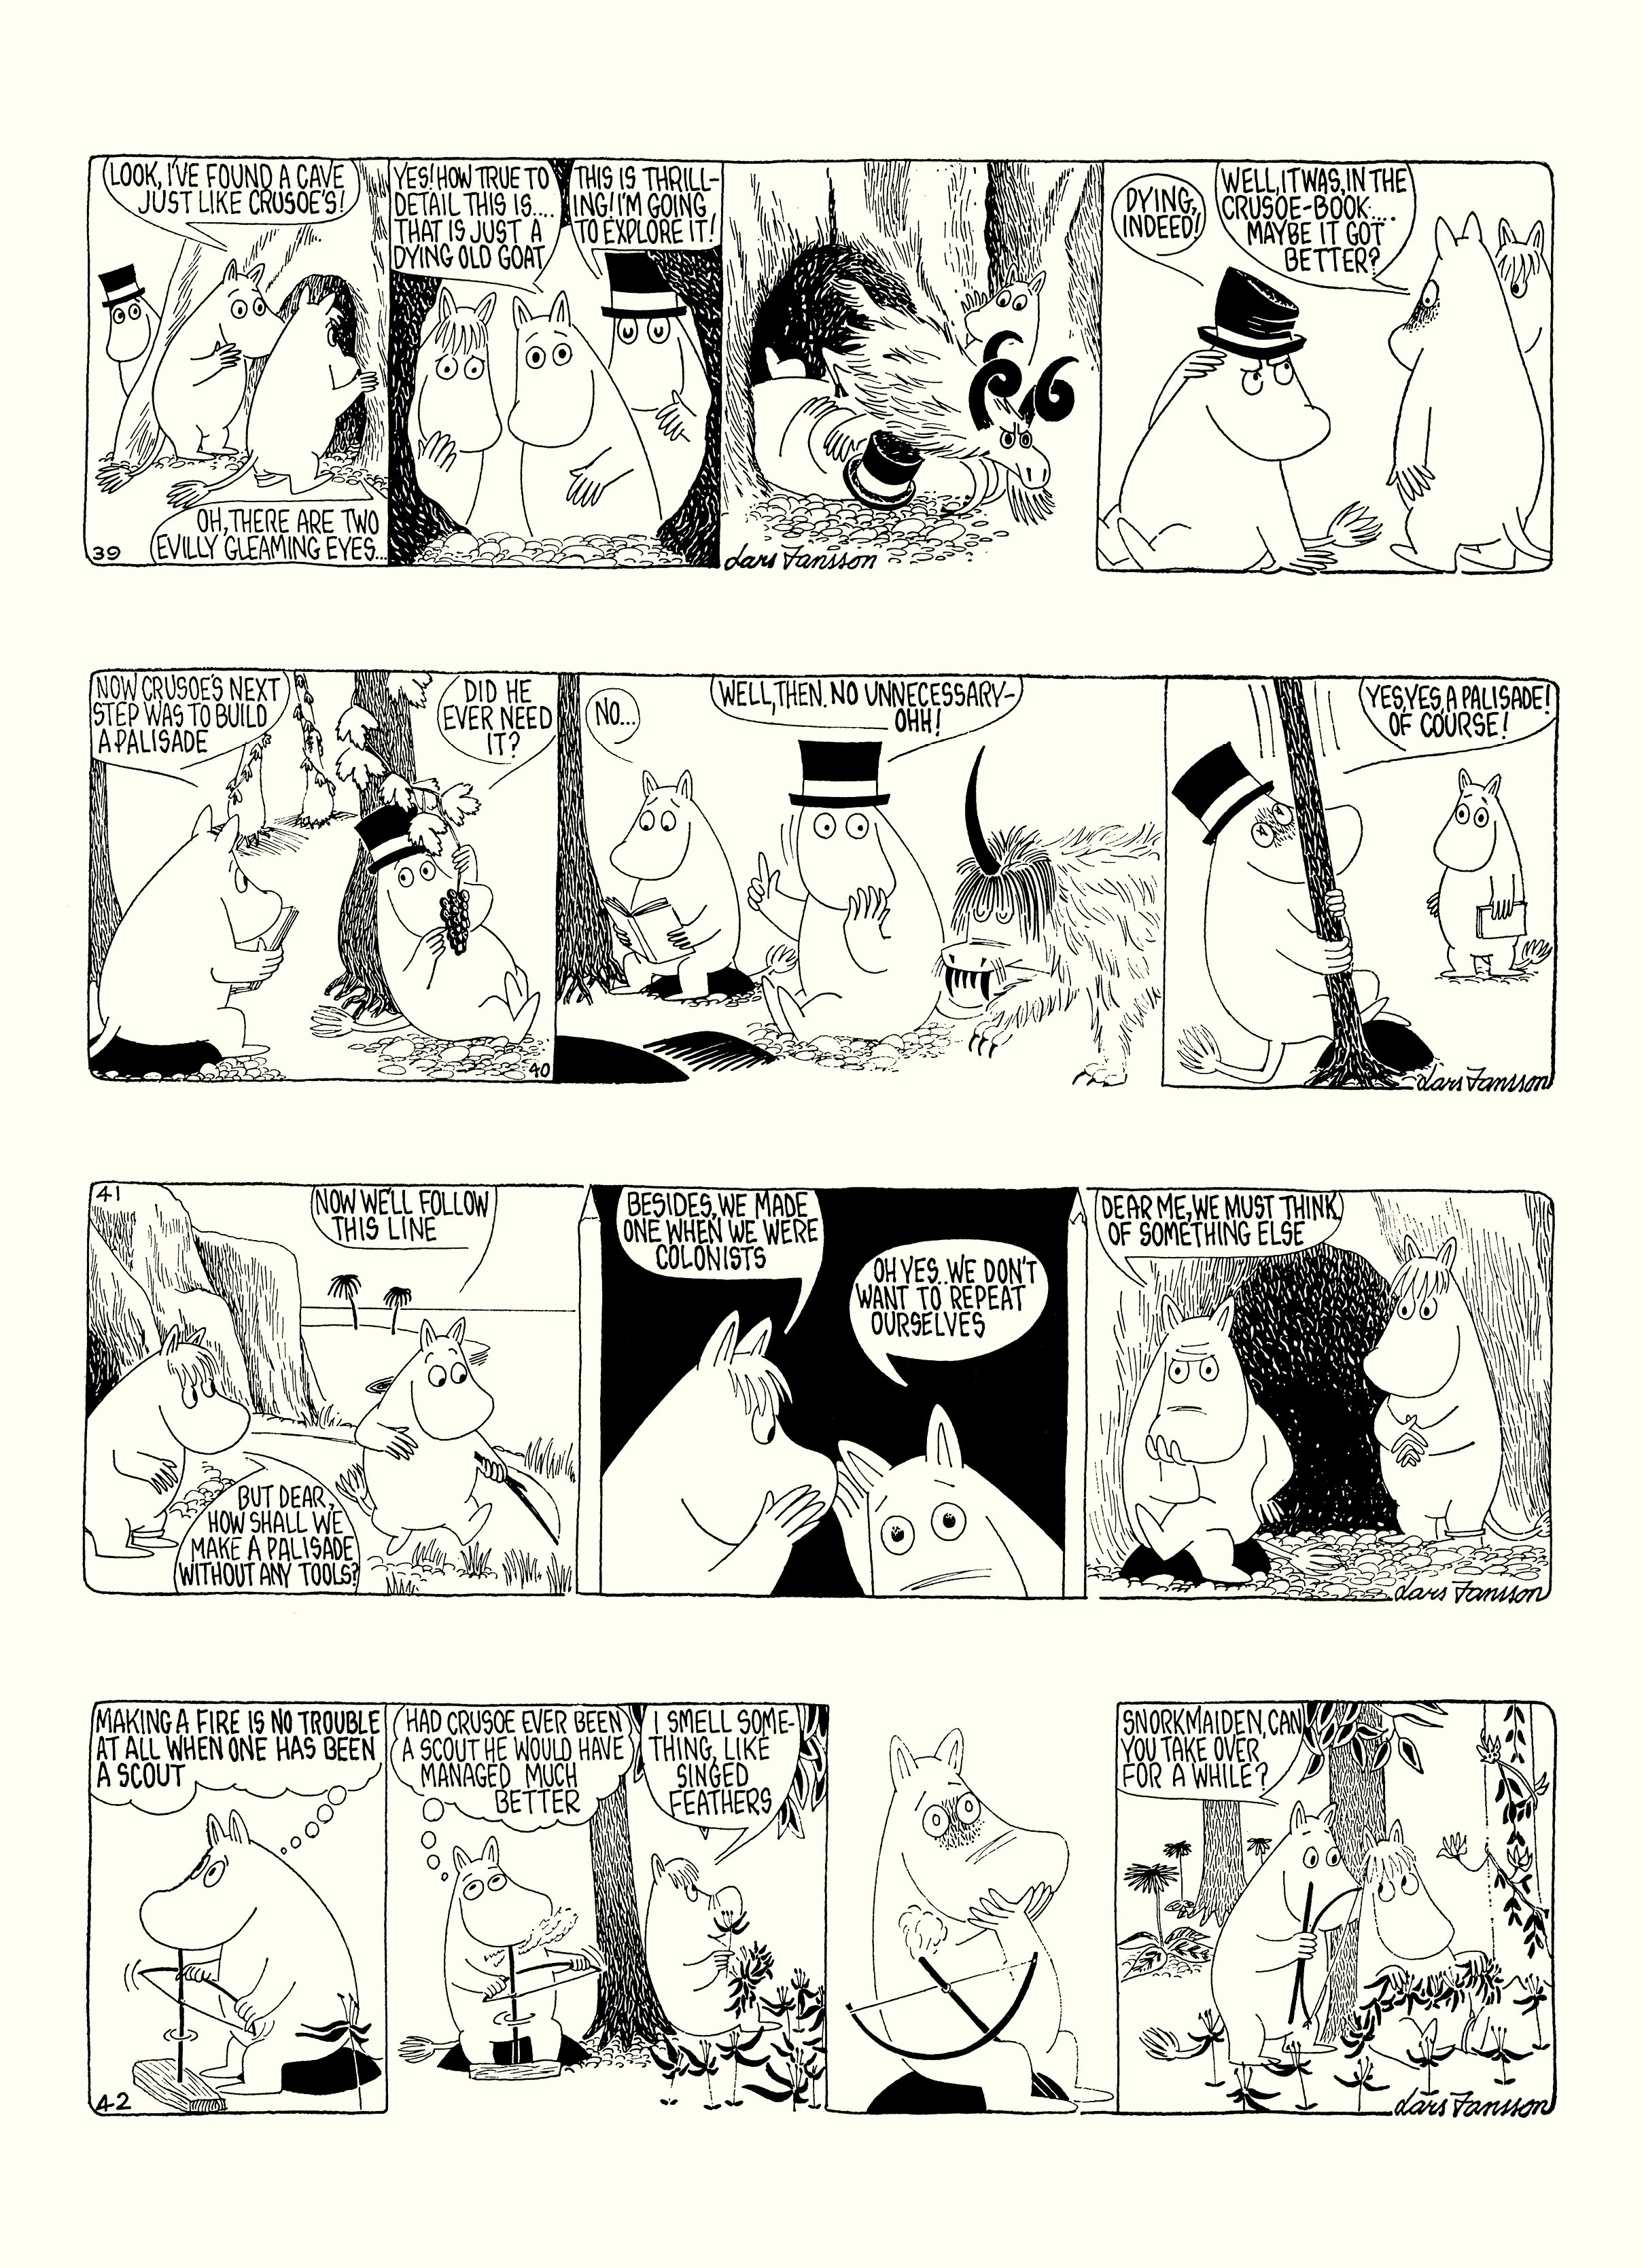 Read online Moomin: The Complete Lars Jansson Comic Strip comic -  Issue # TPB 8 - 15